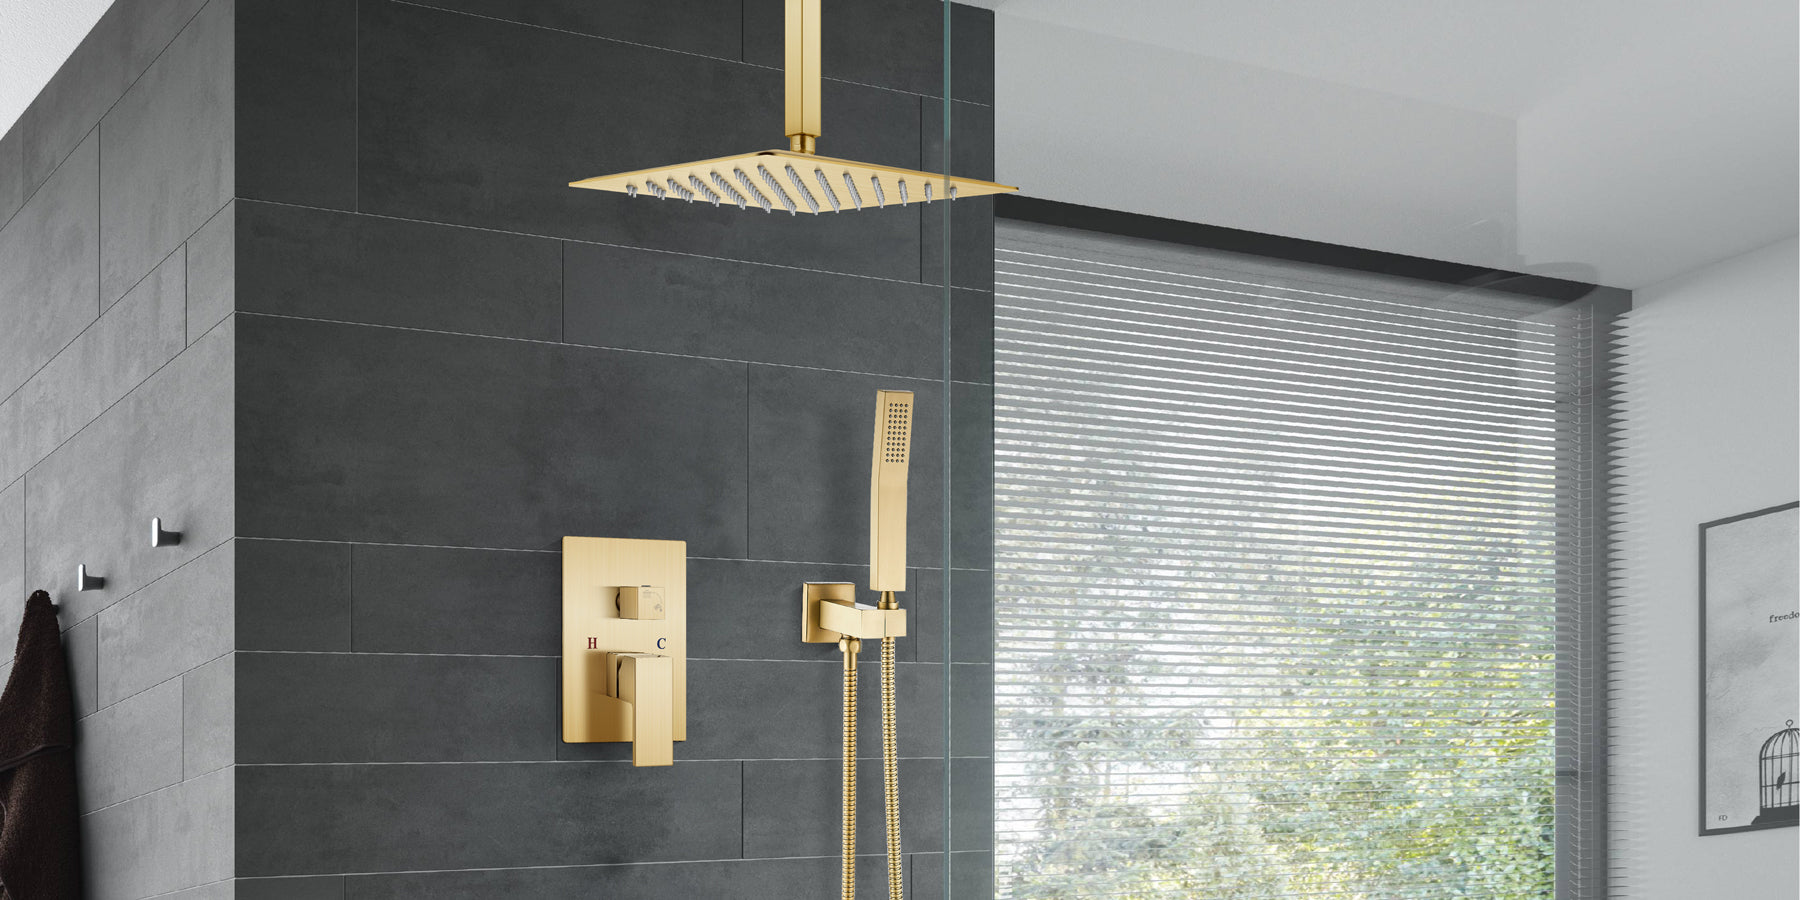 gotonovo Brushed Gold Ceiling Mount Rainfall Shower System with 12 inch Square Shower Head with Handheld shower and Pressure Balance Shower Valve Kit Luxury Rain Mixer Shower Combo Set Bathroom